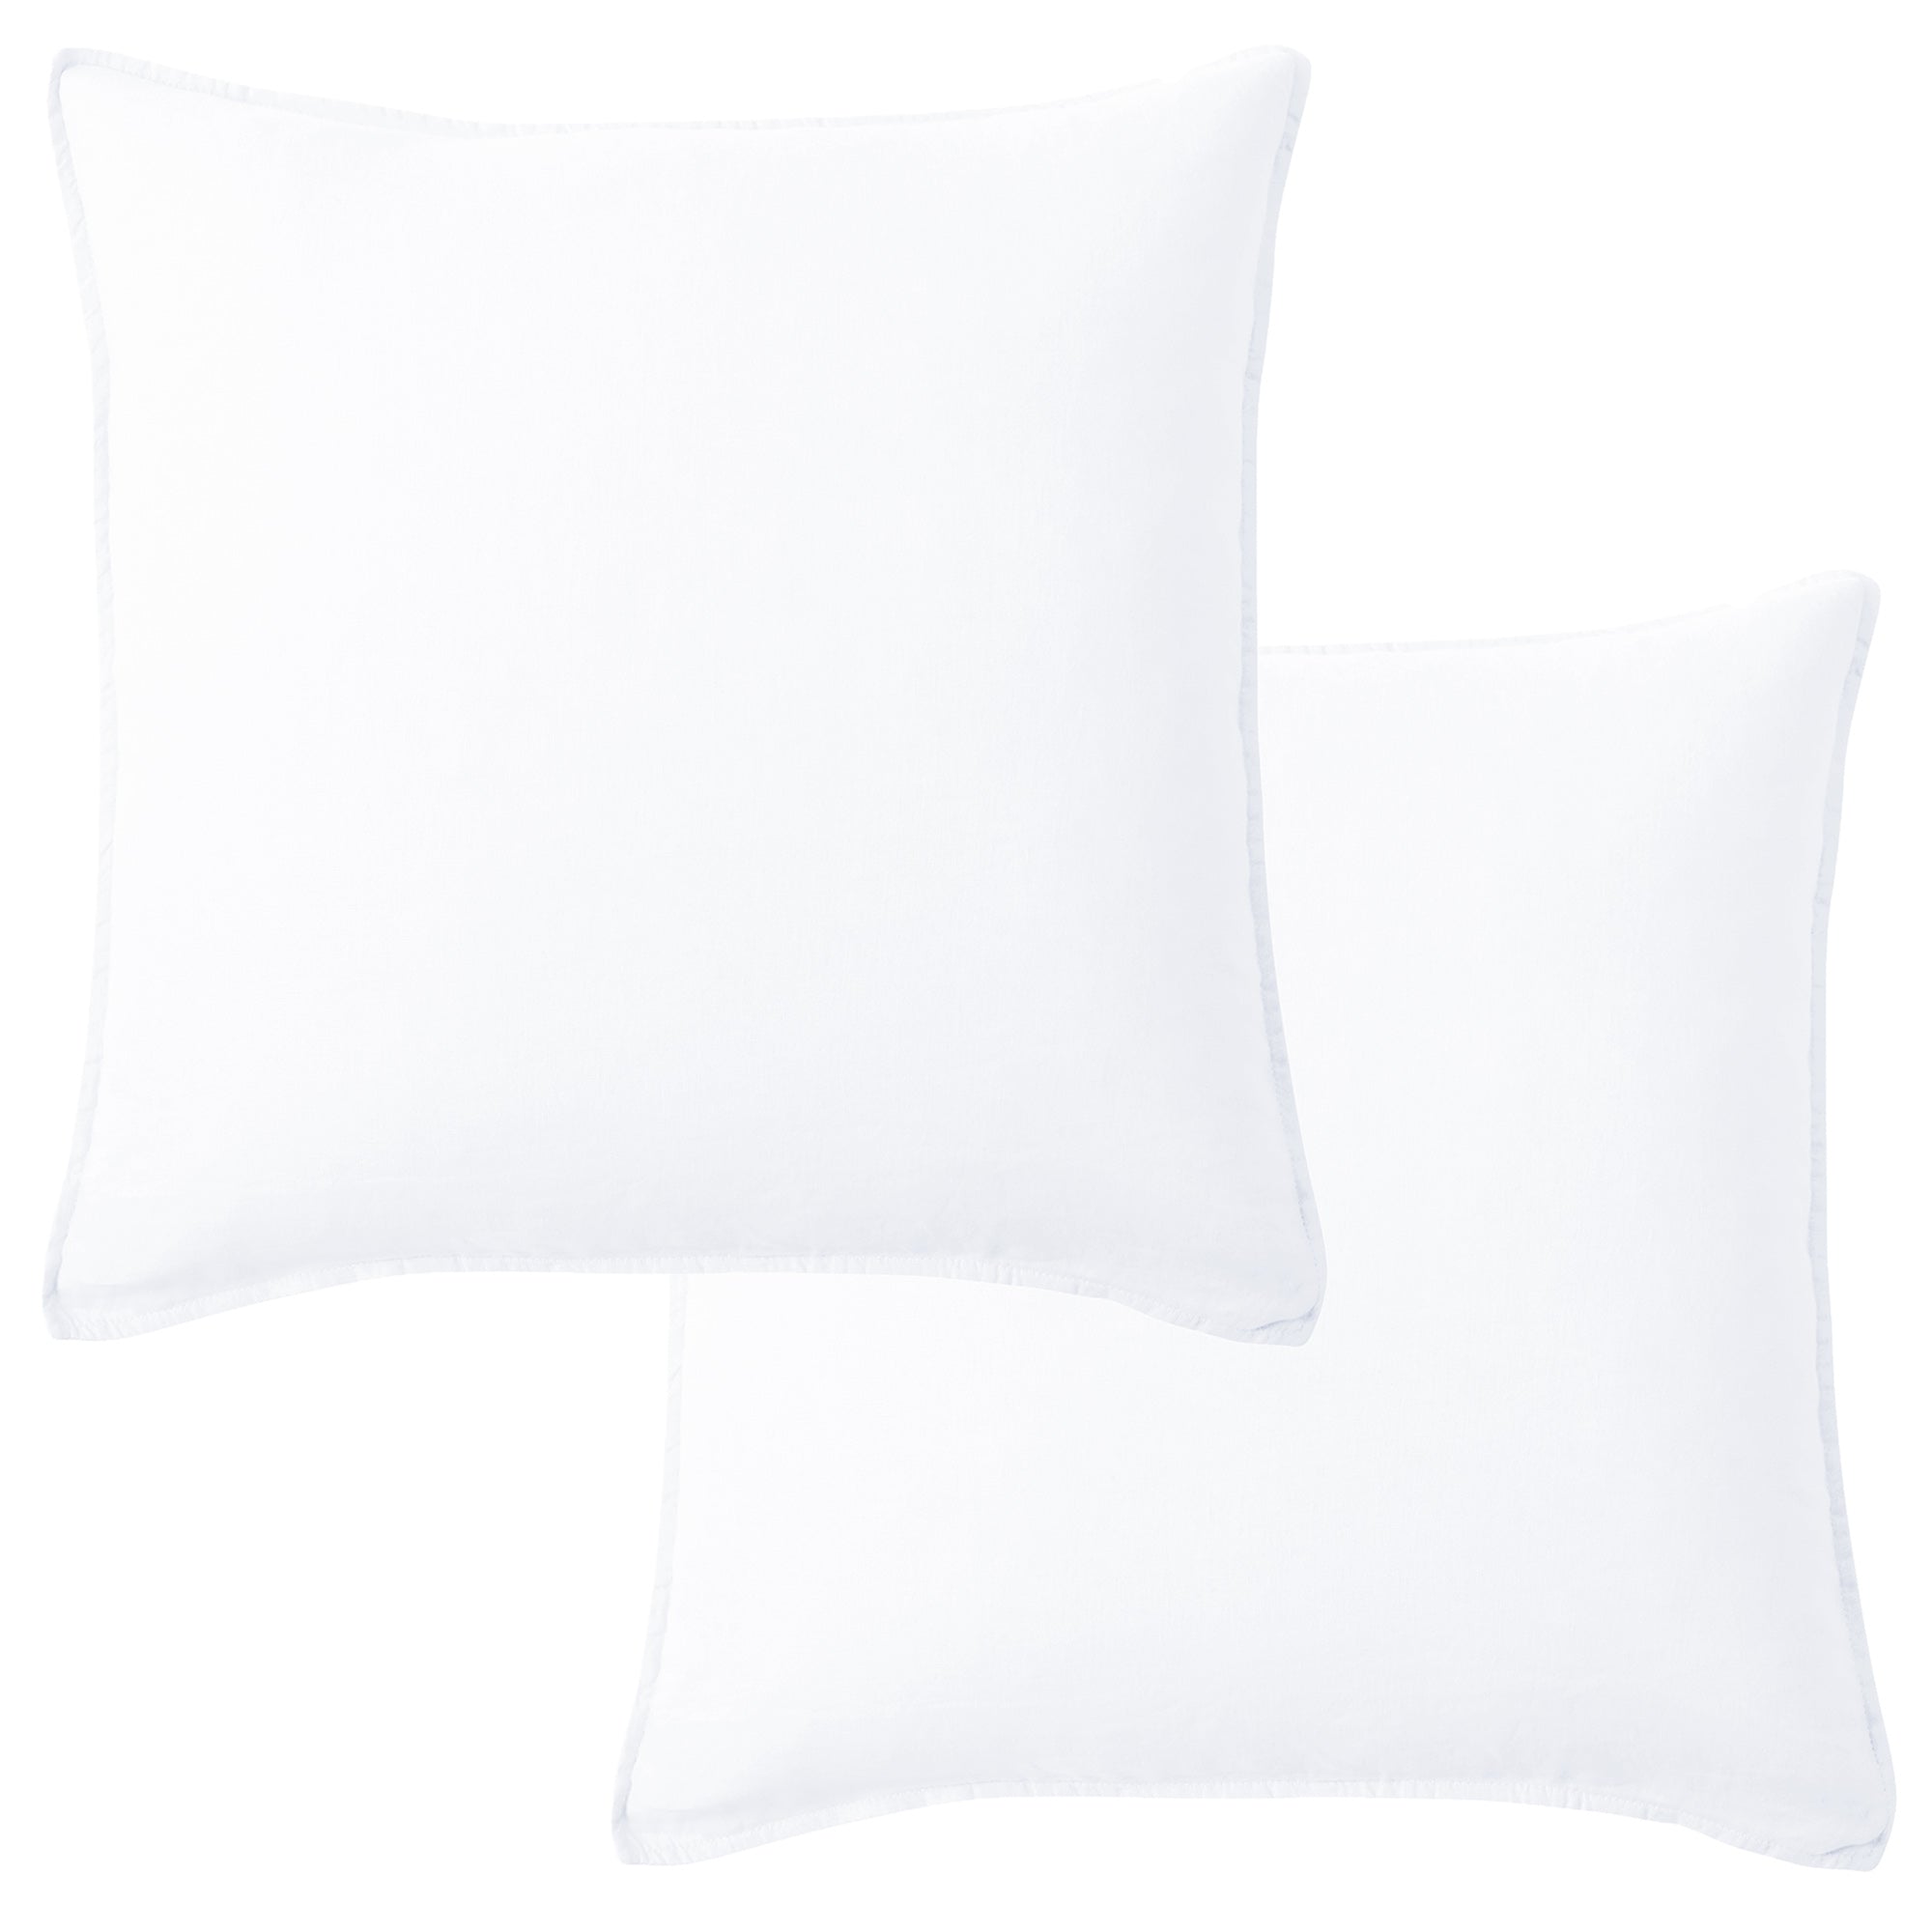 Washed Linen Square Pillow - Set of 2